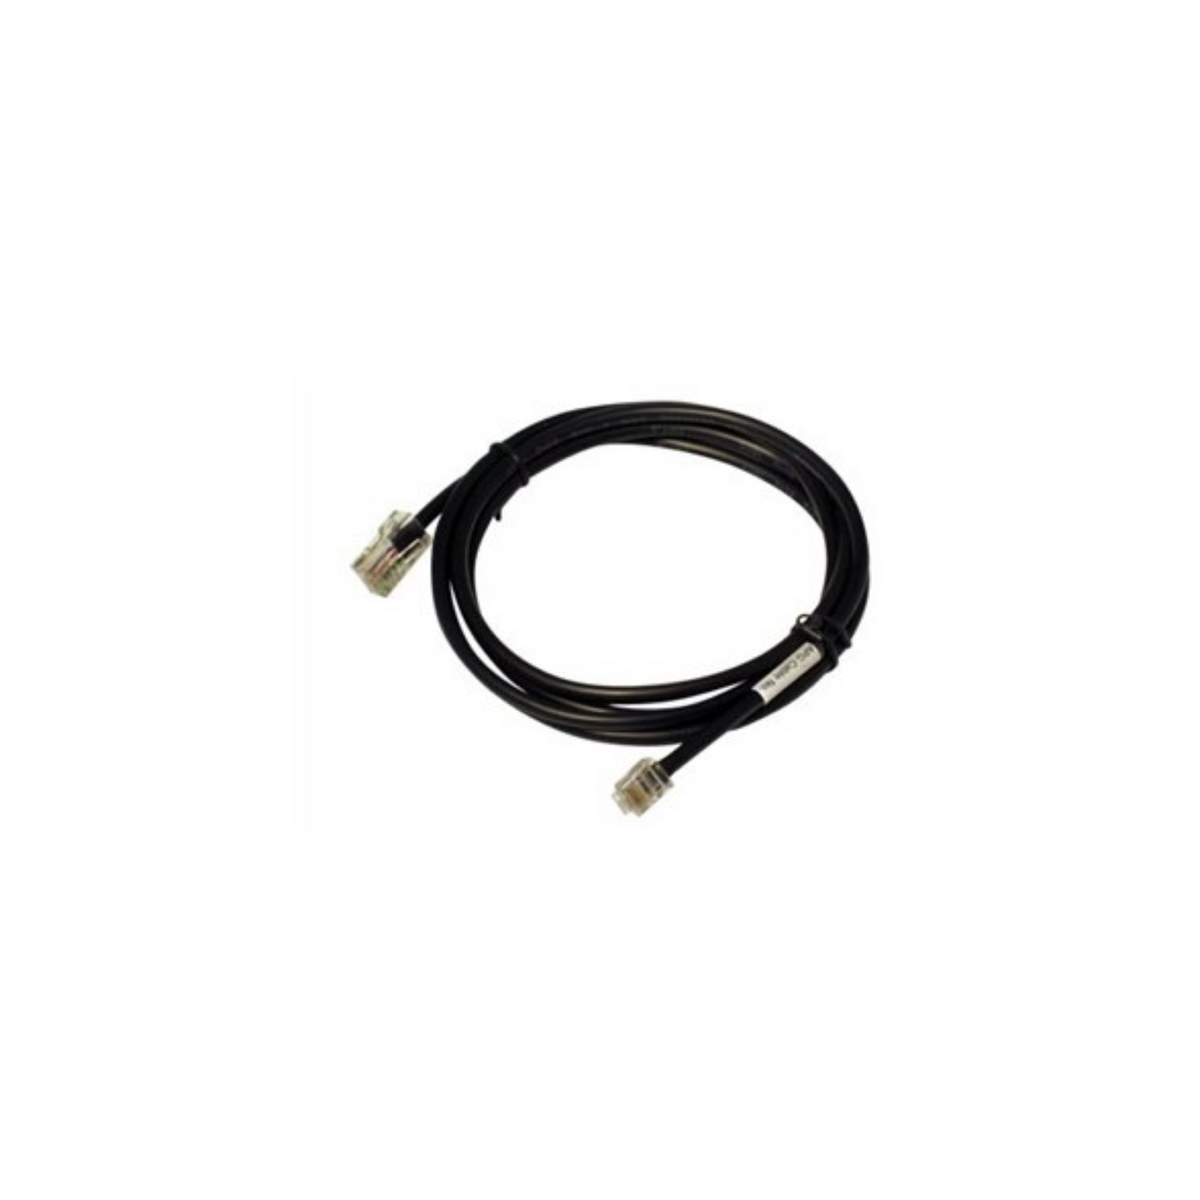 Apg, Printer cable for Star and Epson Printers